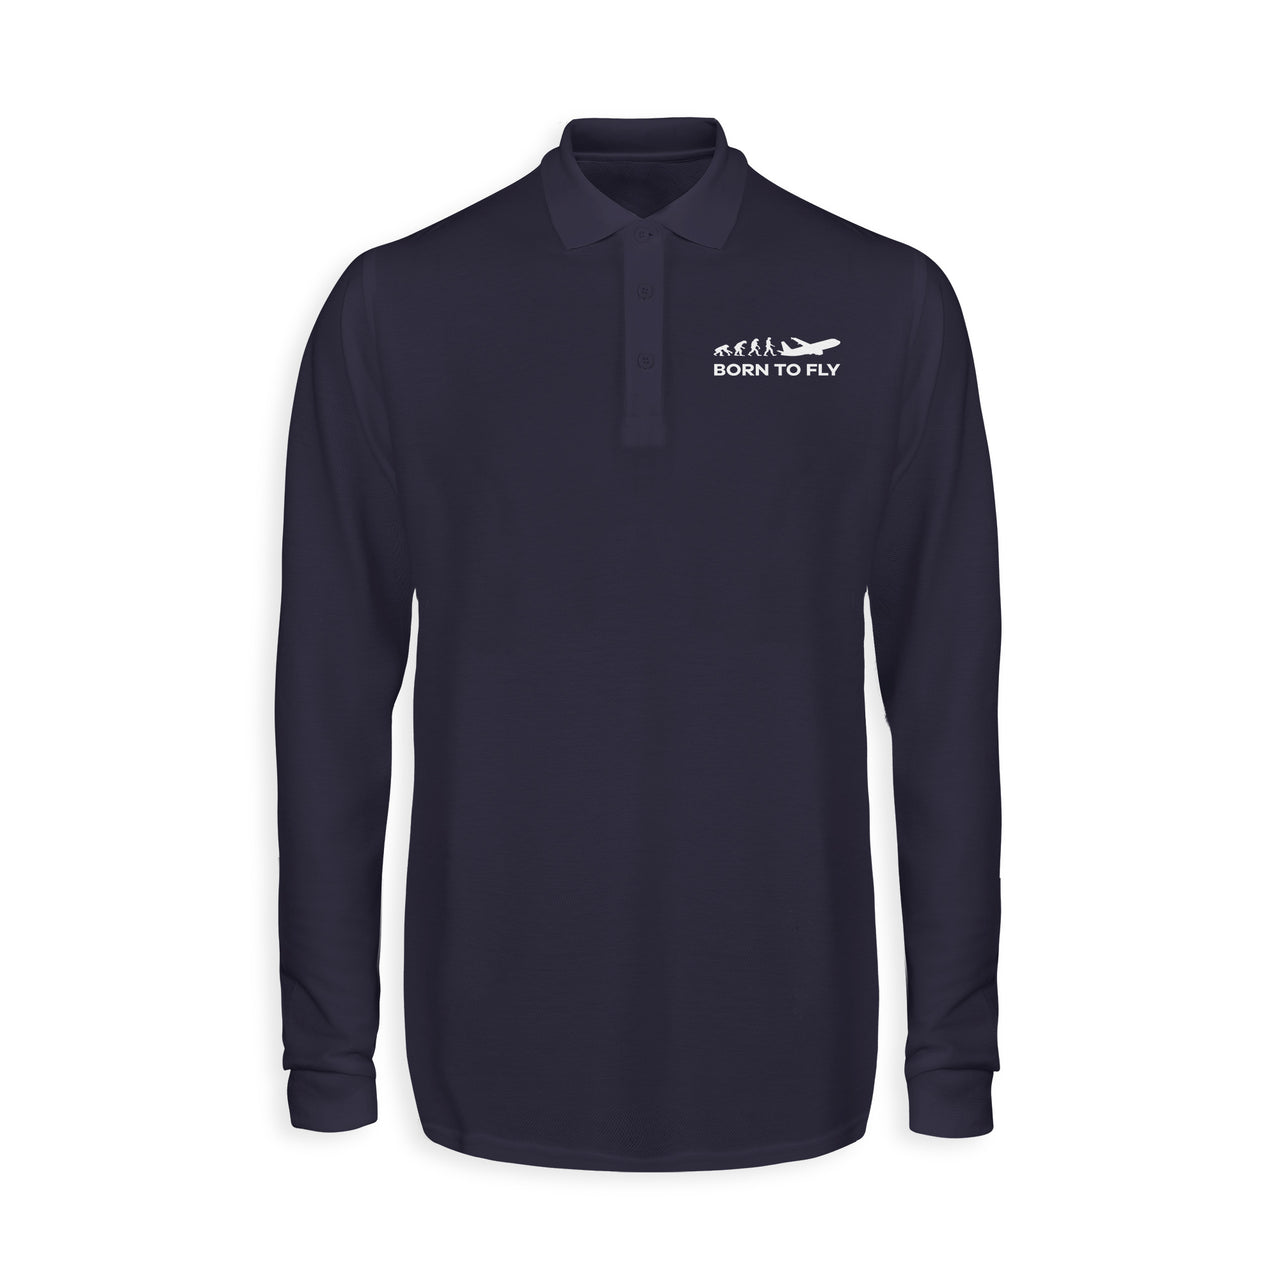 Born To Fly Designed Long Sleeve Polo T-Shirts